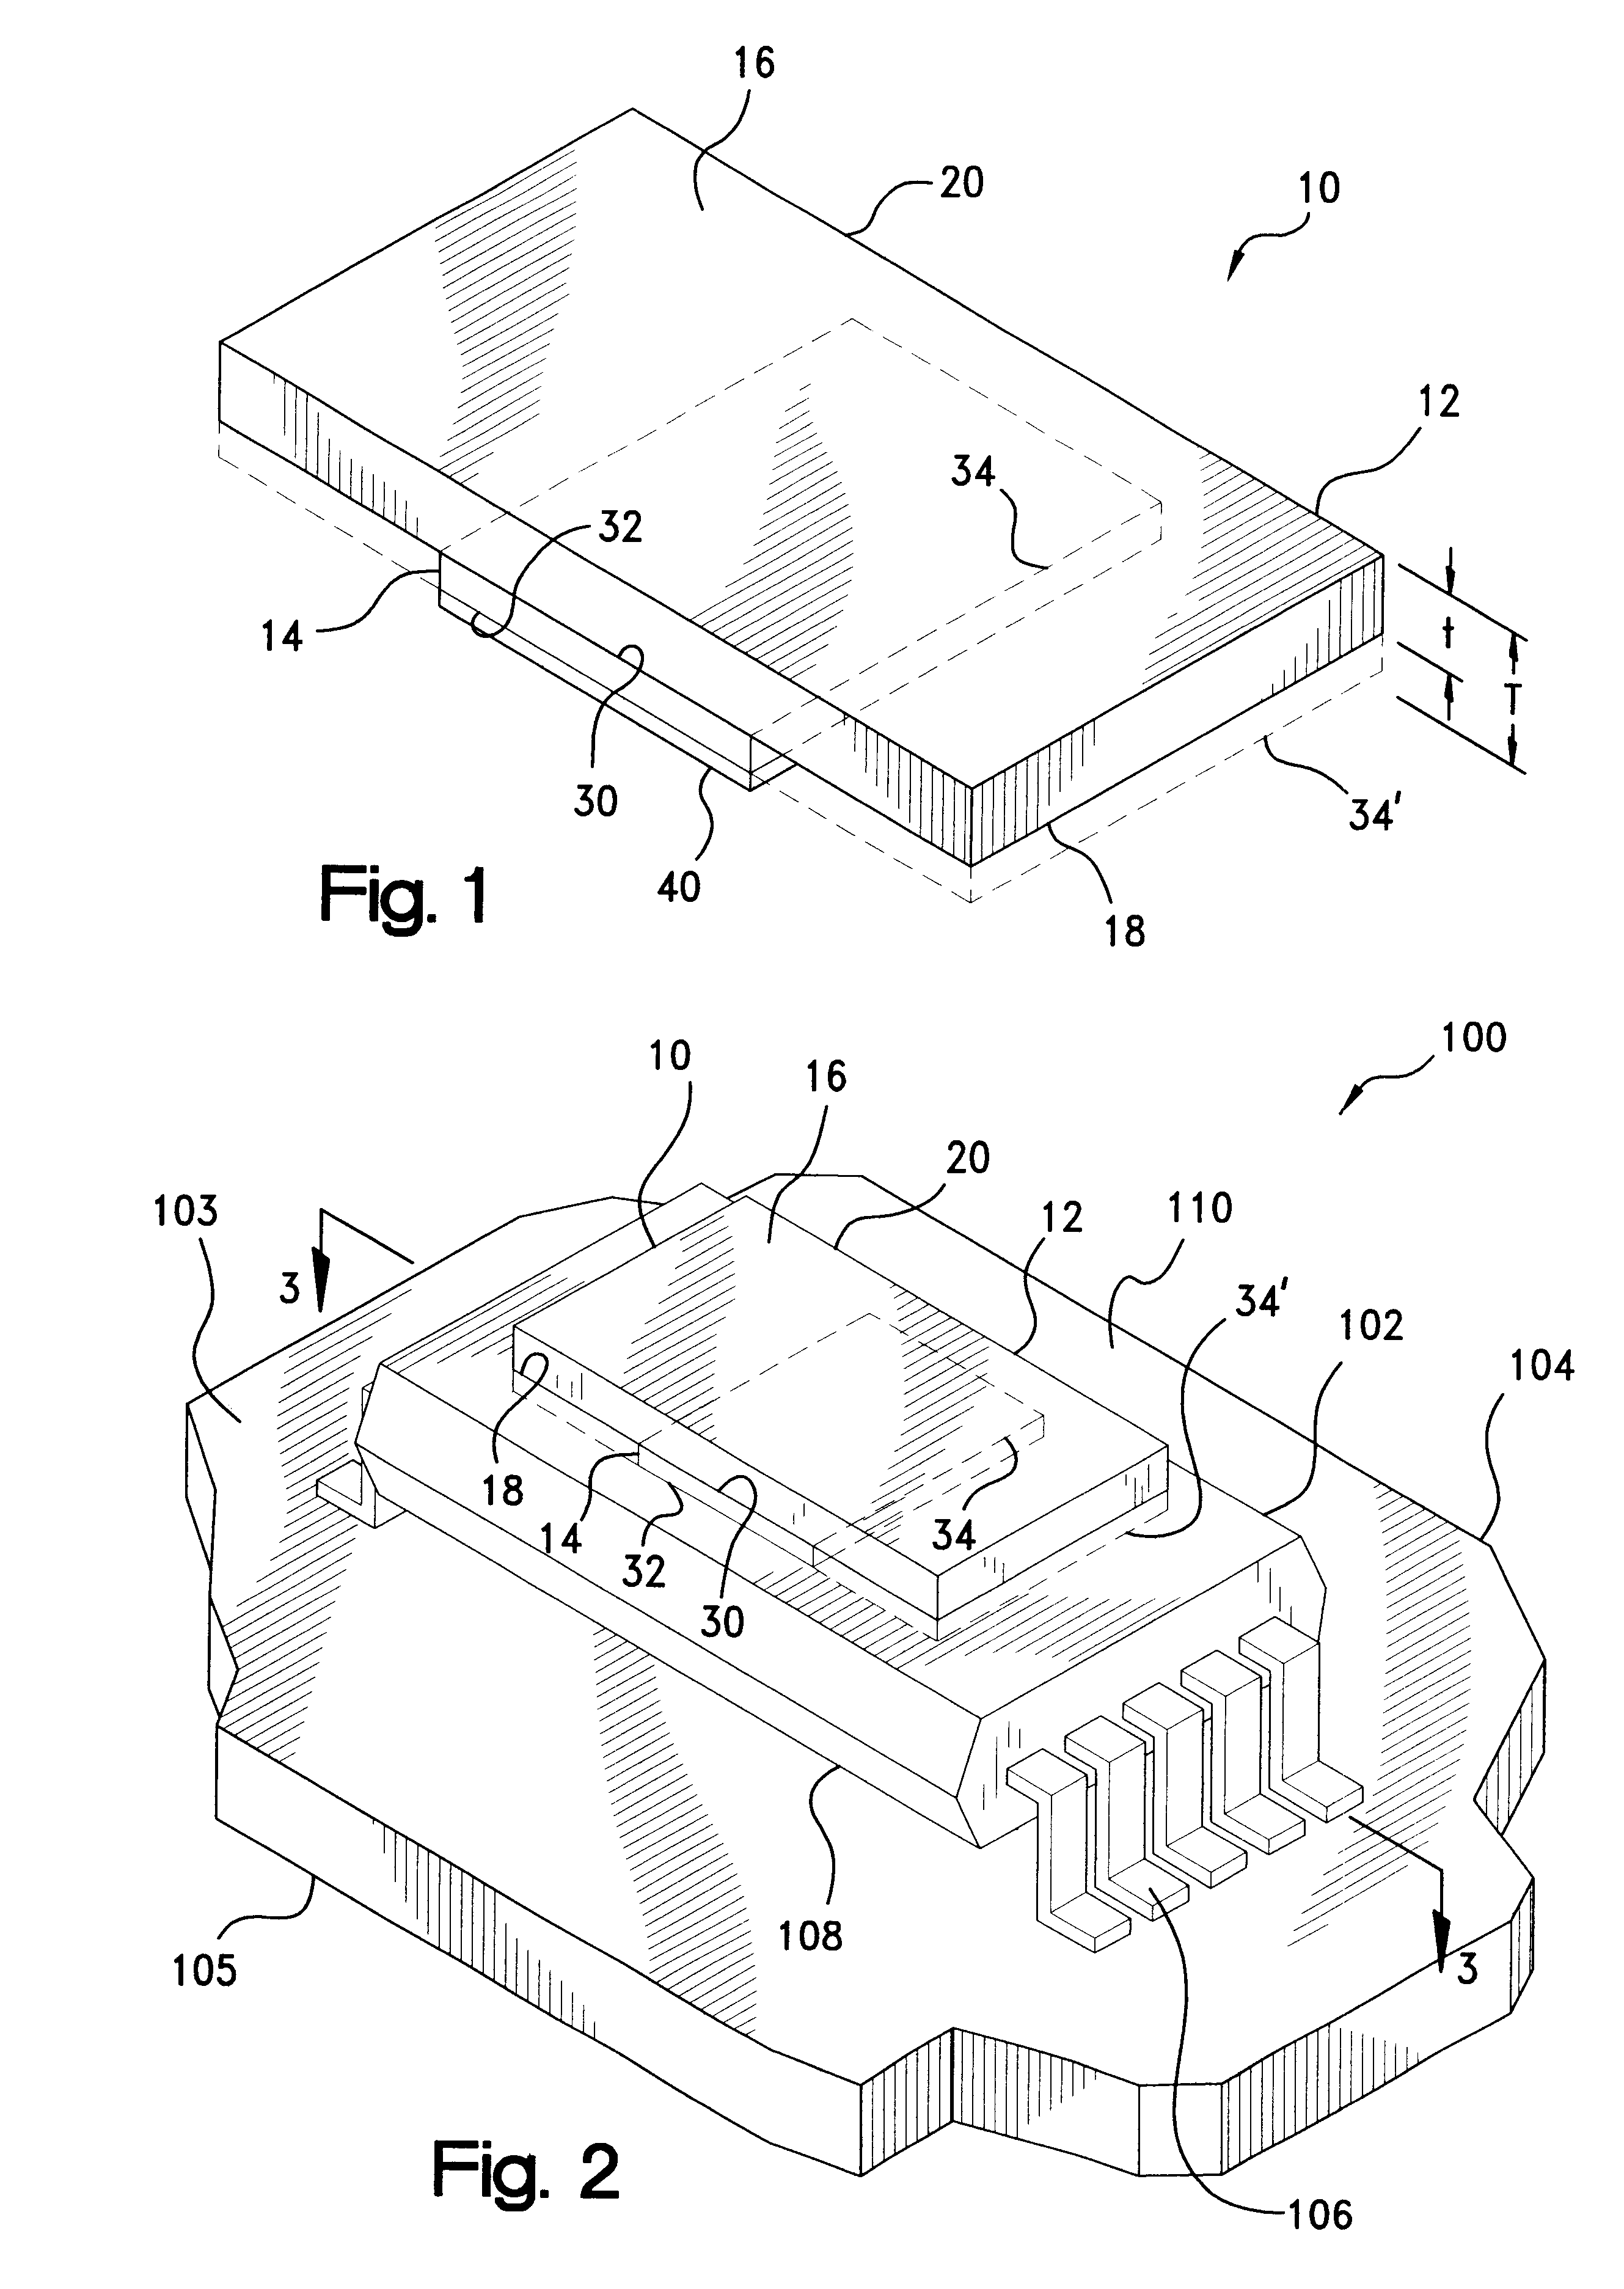 Non-electrically conductive thermal dissipator for electronic components